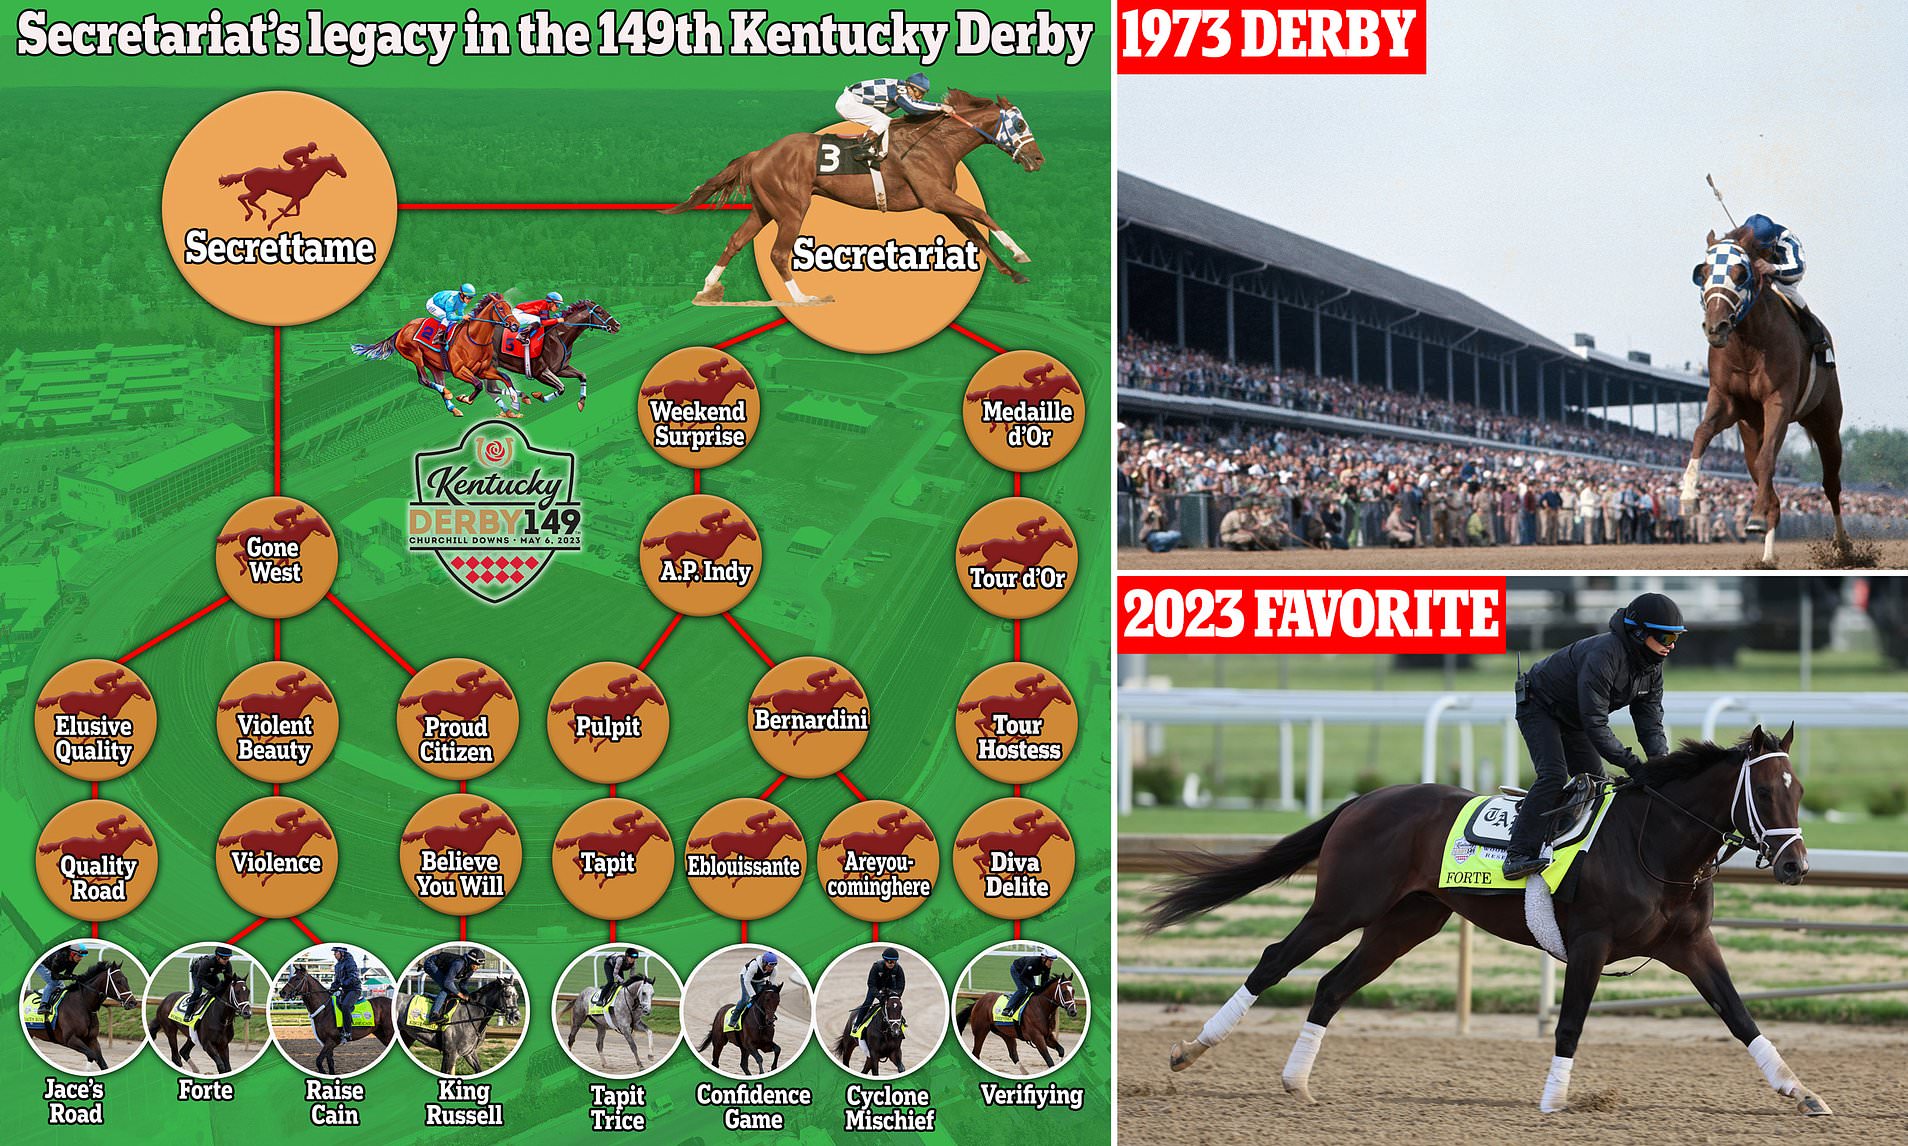 Photo: what were the odds on secretariat in kentucky derby